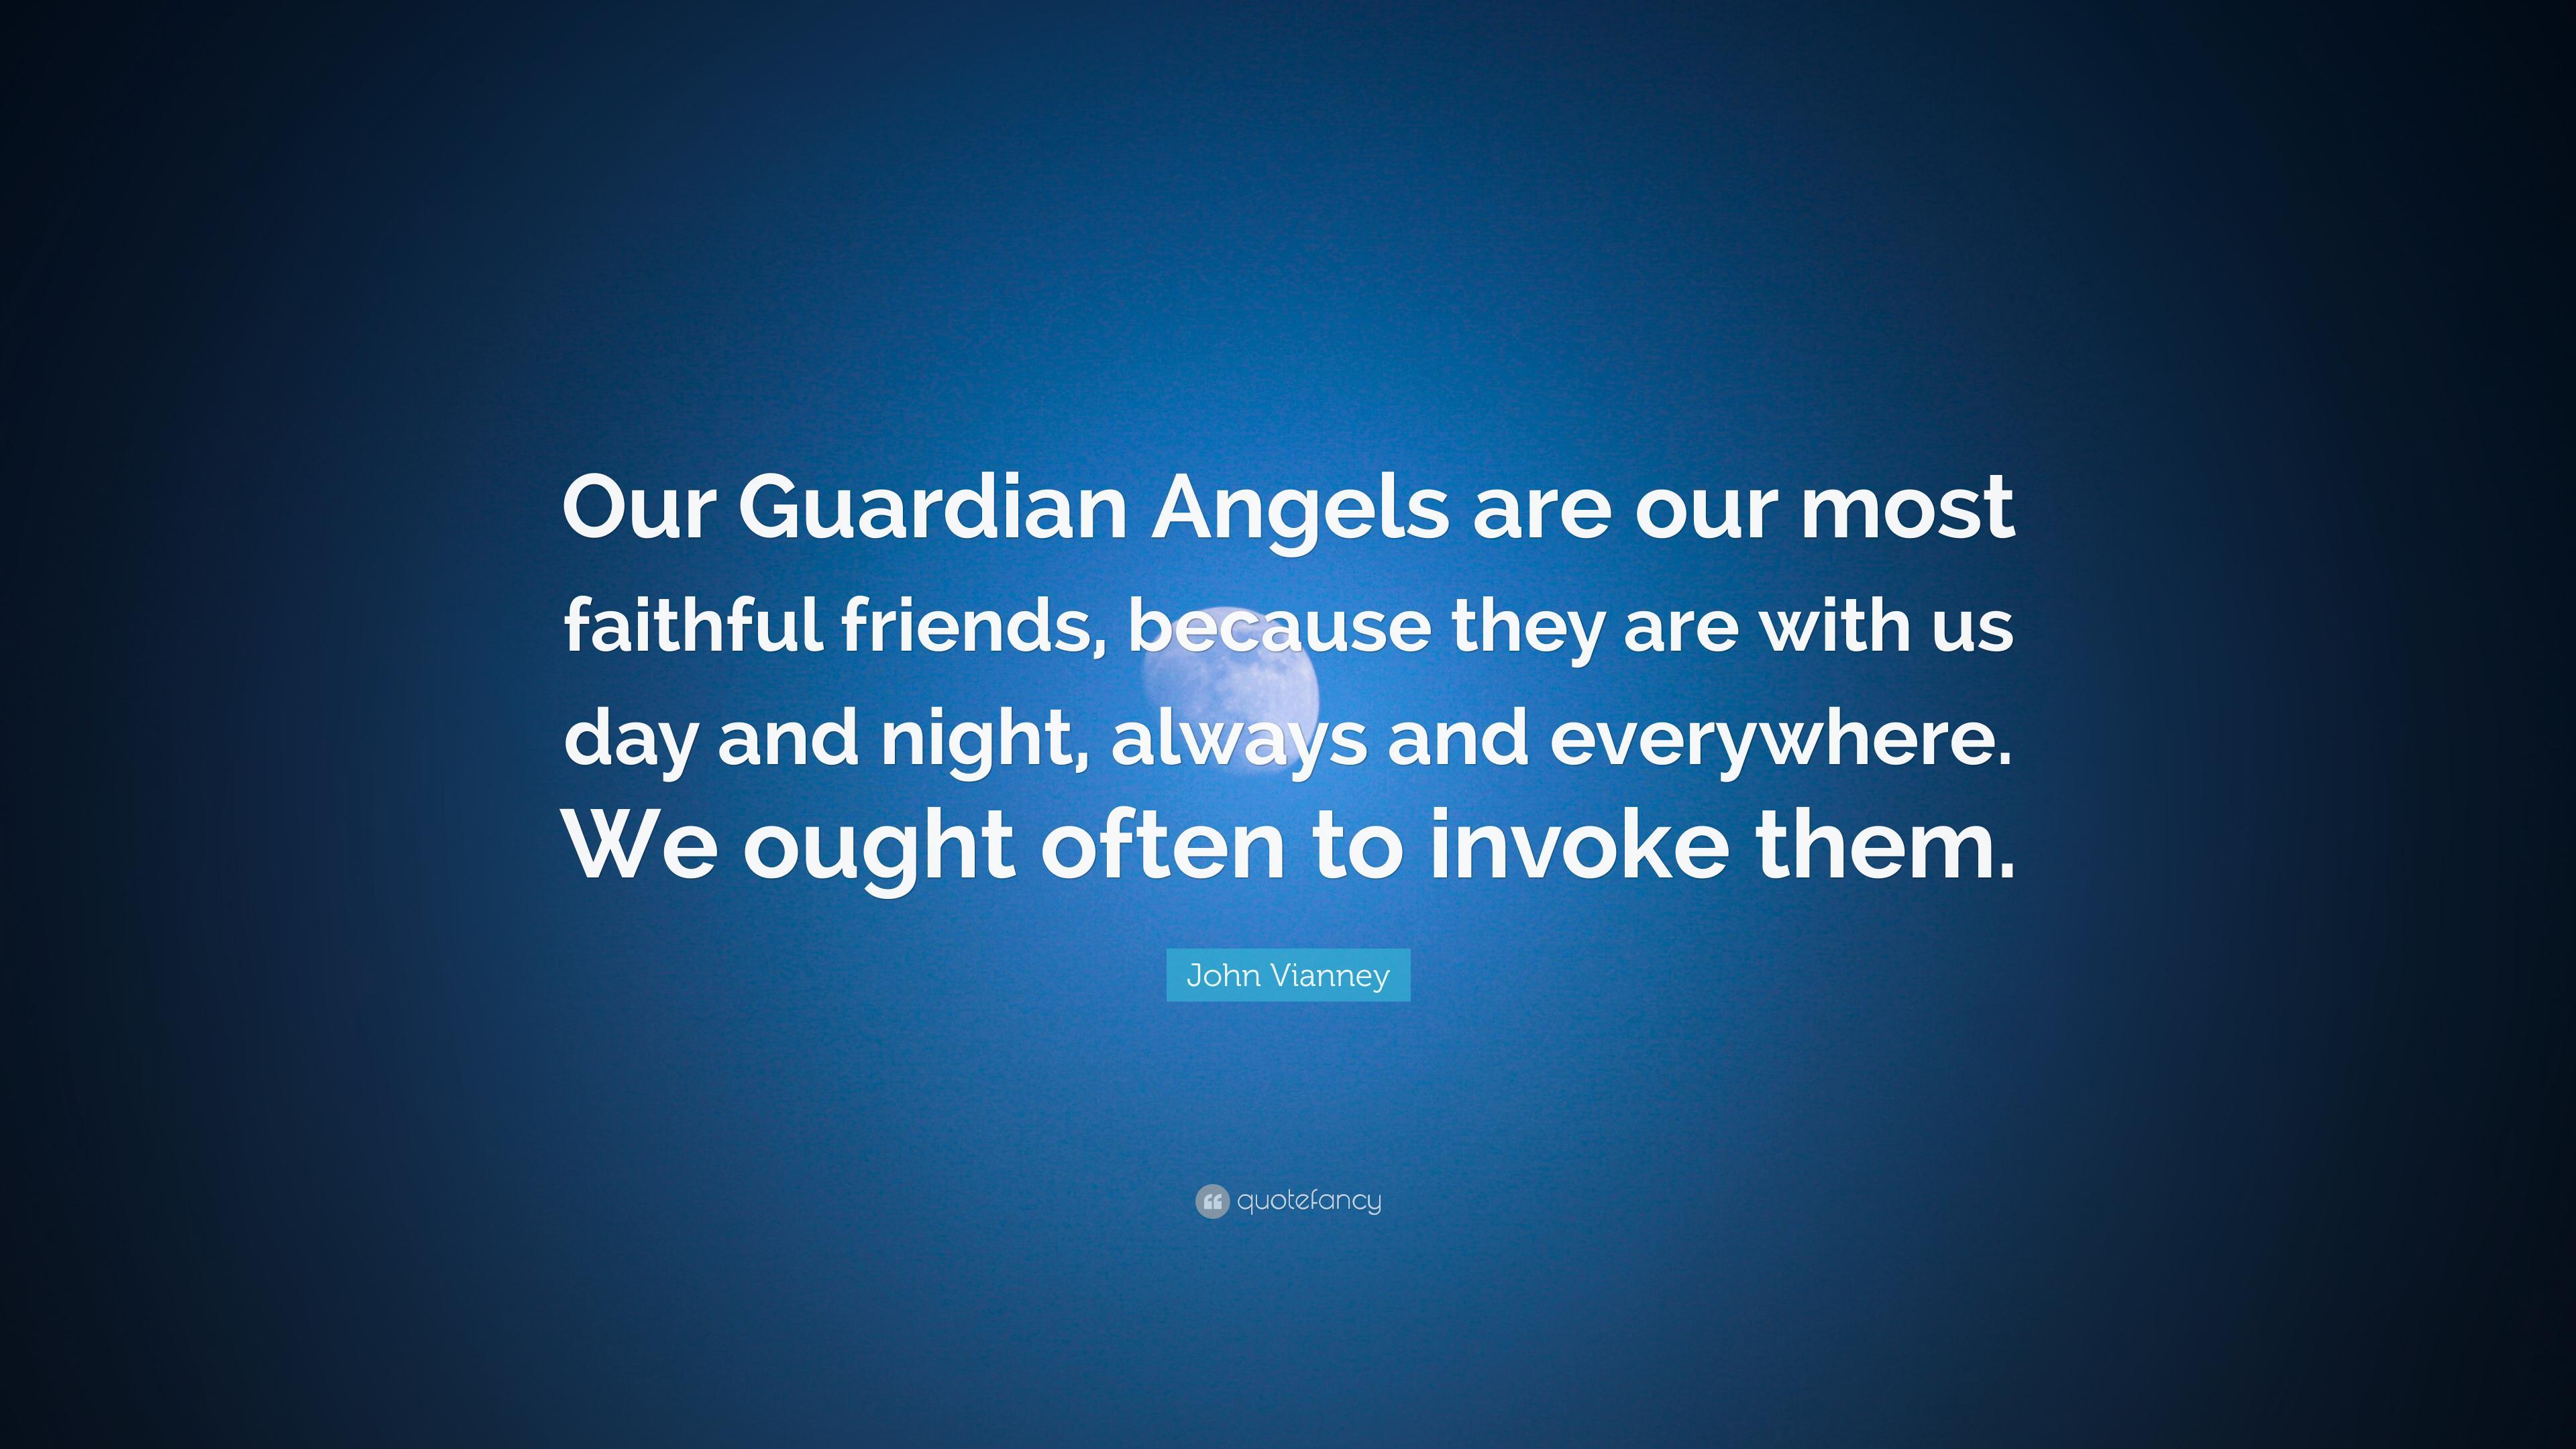 John Vianney Quote: “Our Guardian Angels are our most